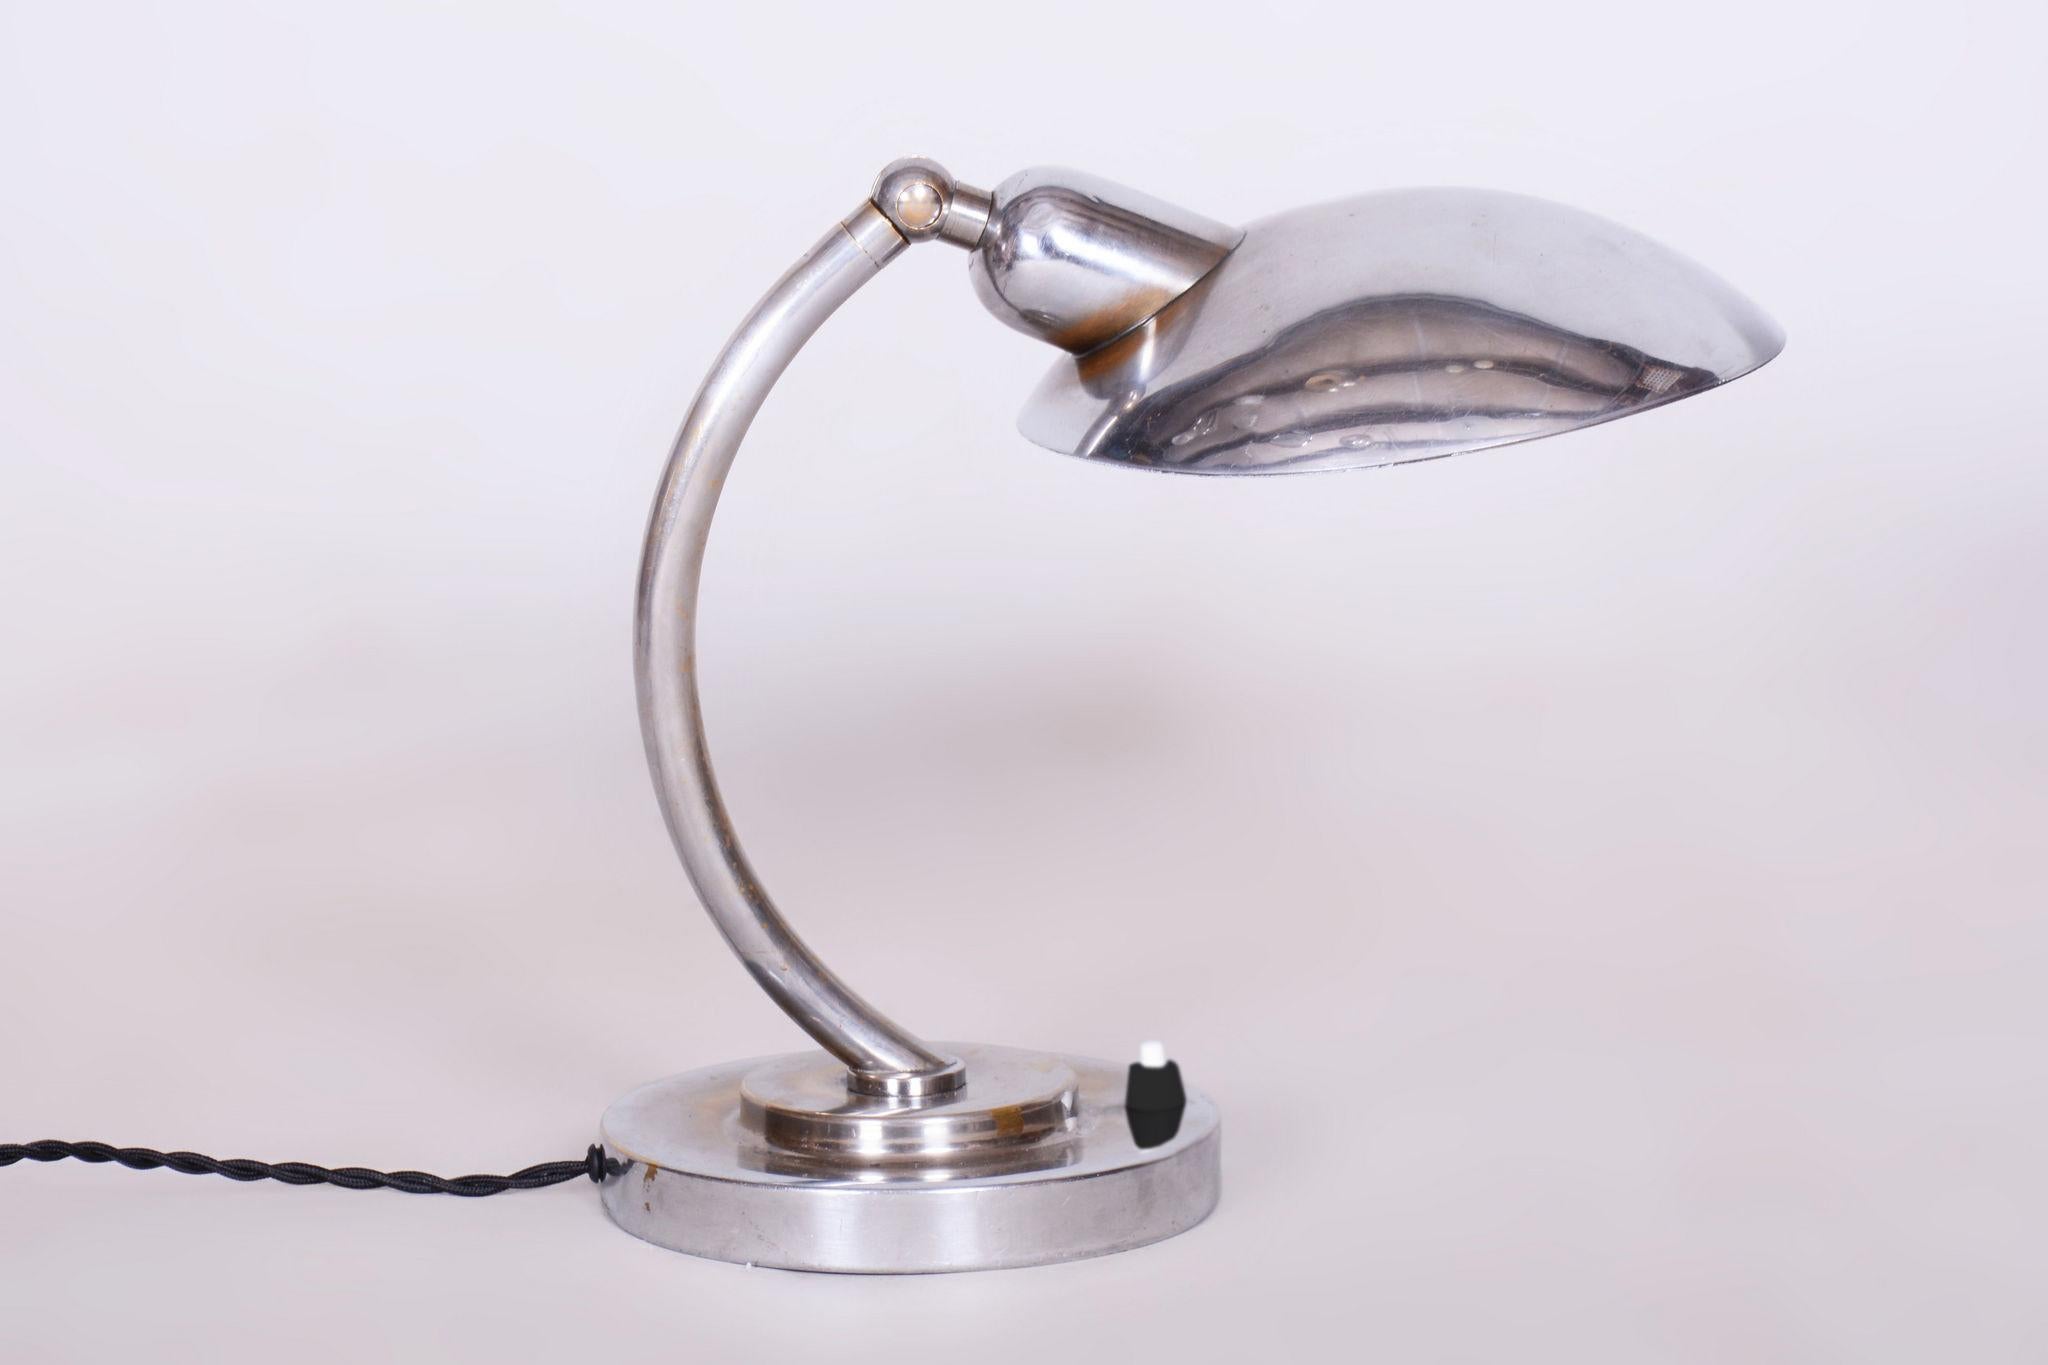 Restored Bauhaus Chrome Table Lamp, F. Anyz, New Electrification, Czechia, 1920s For Sale 4